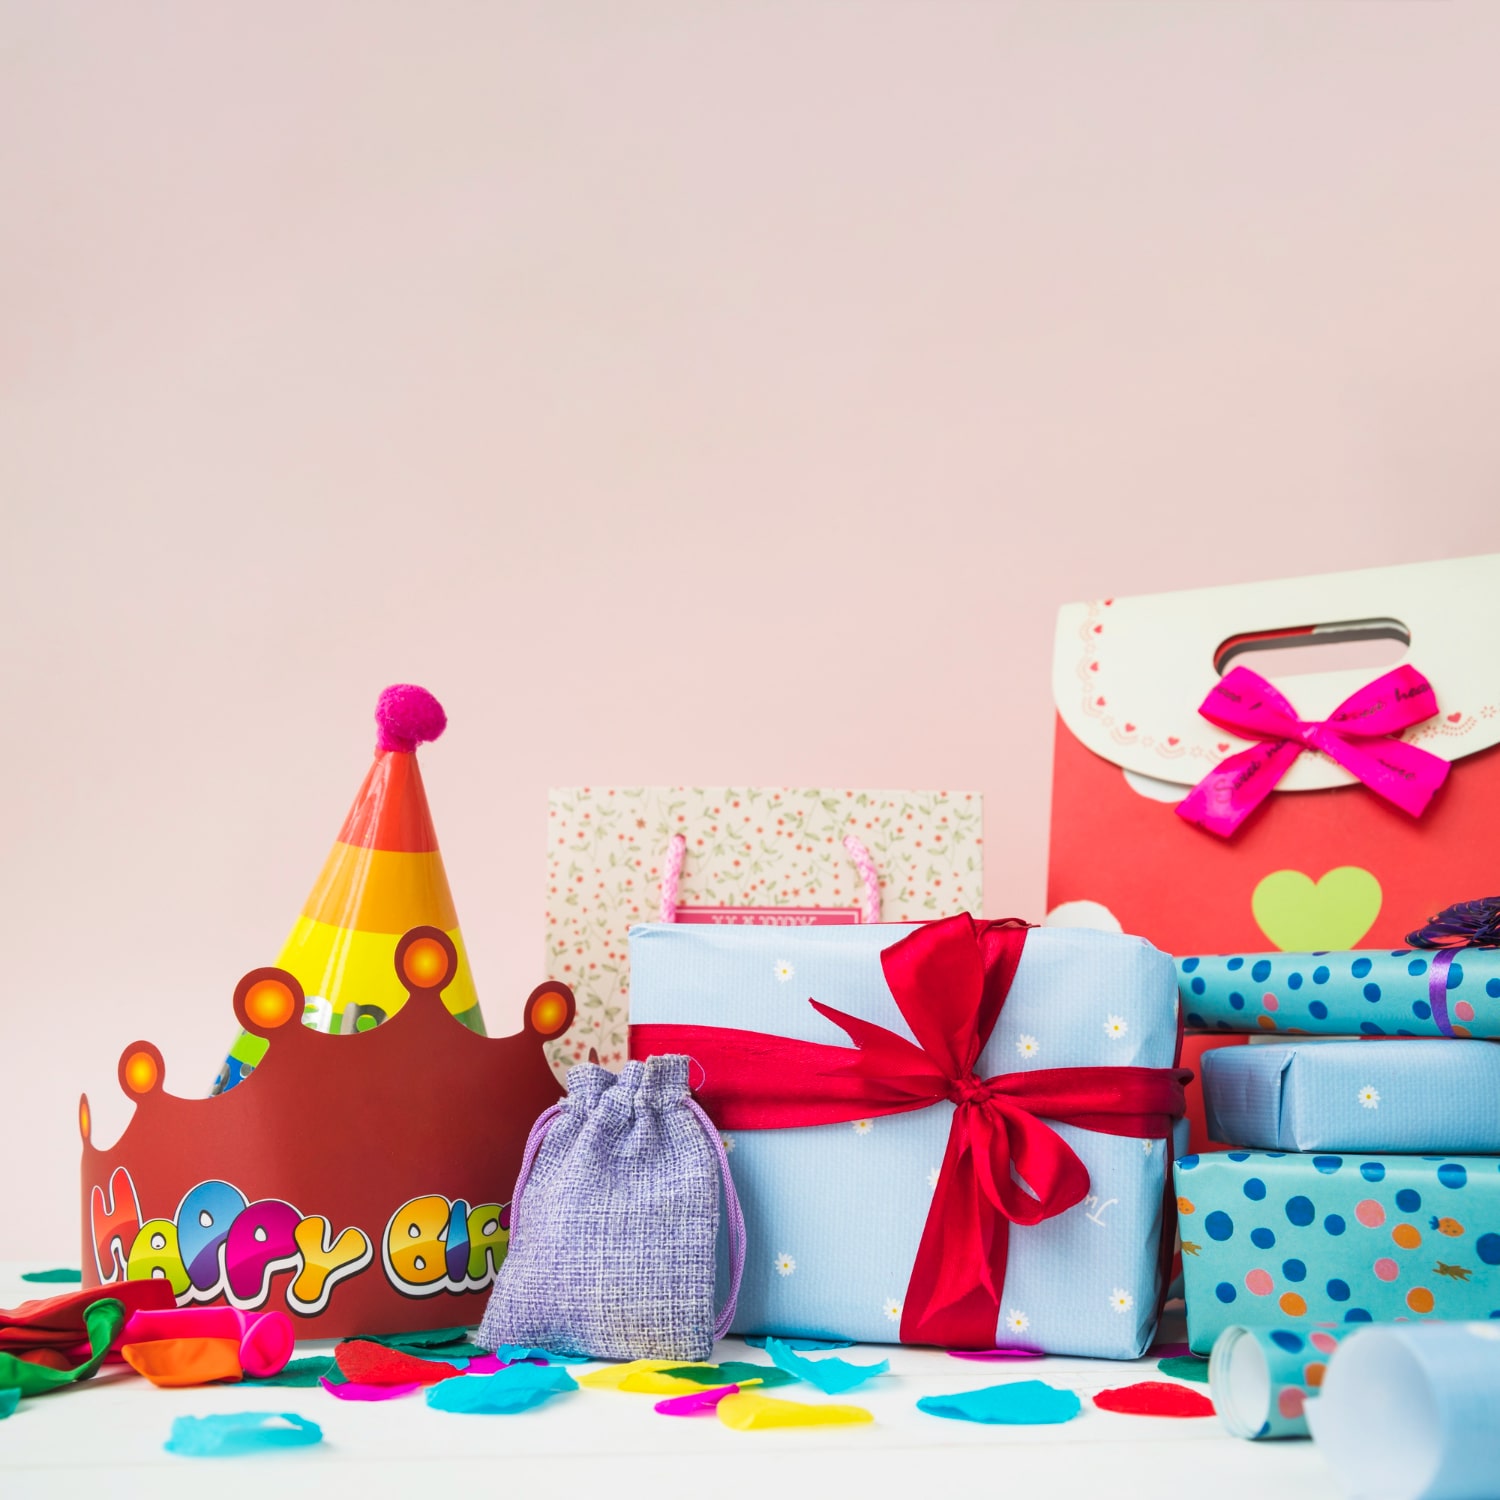 Colorful birthday setup, adaptable for wedding gift ideas for friends